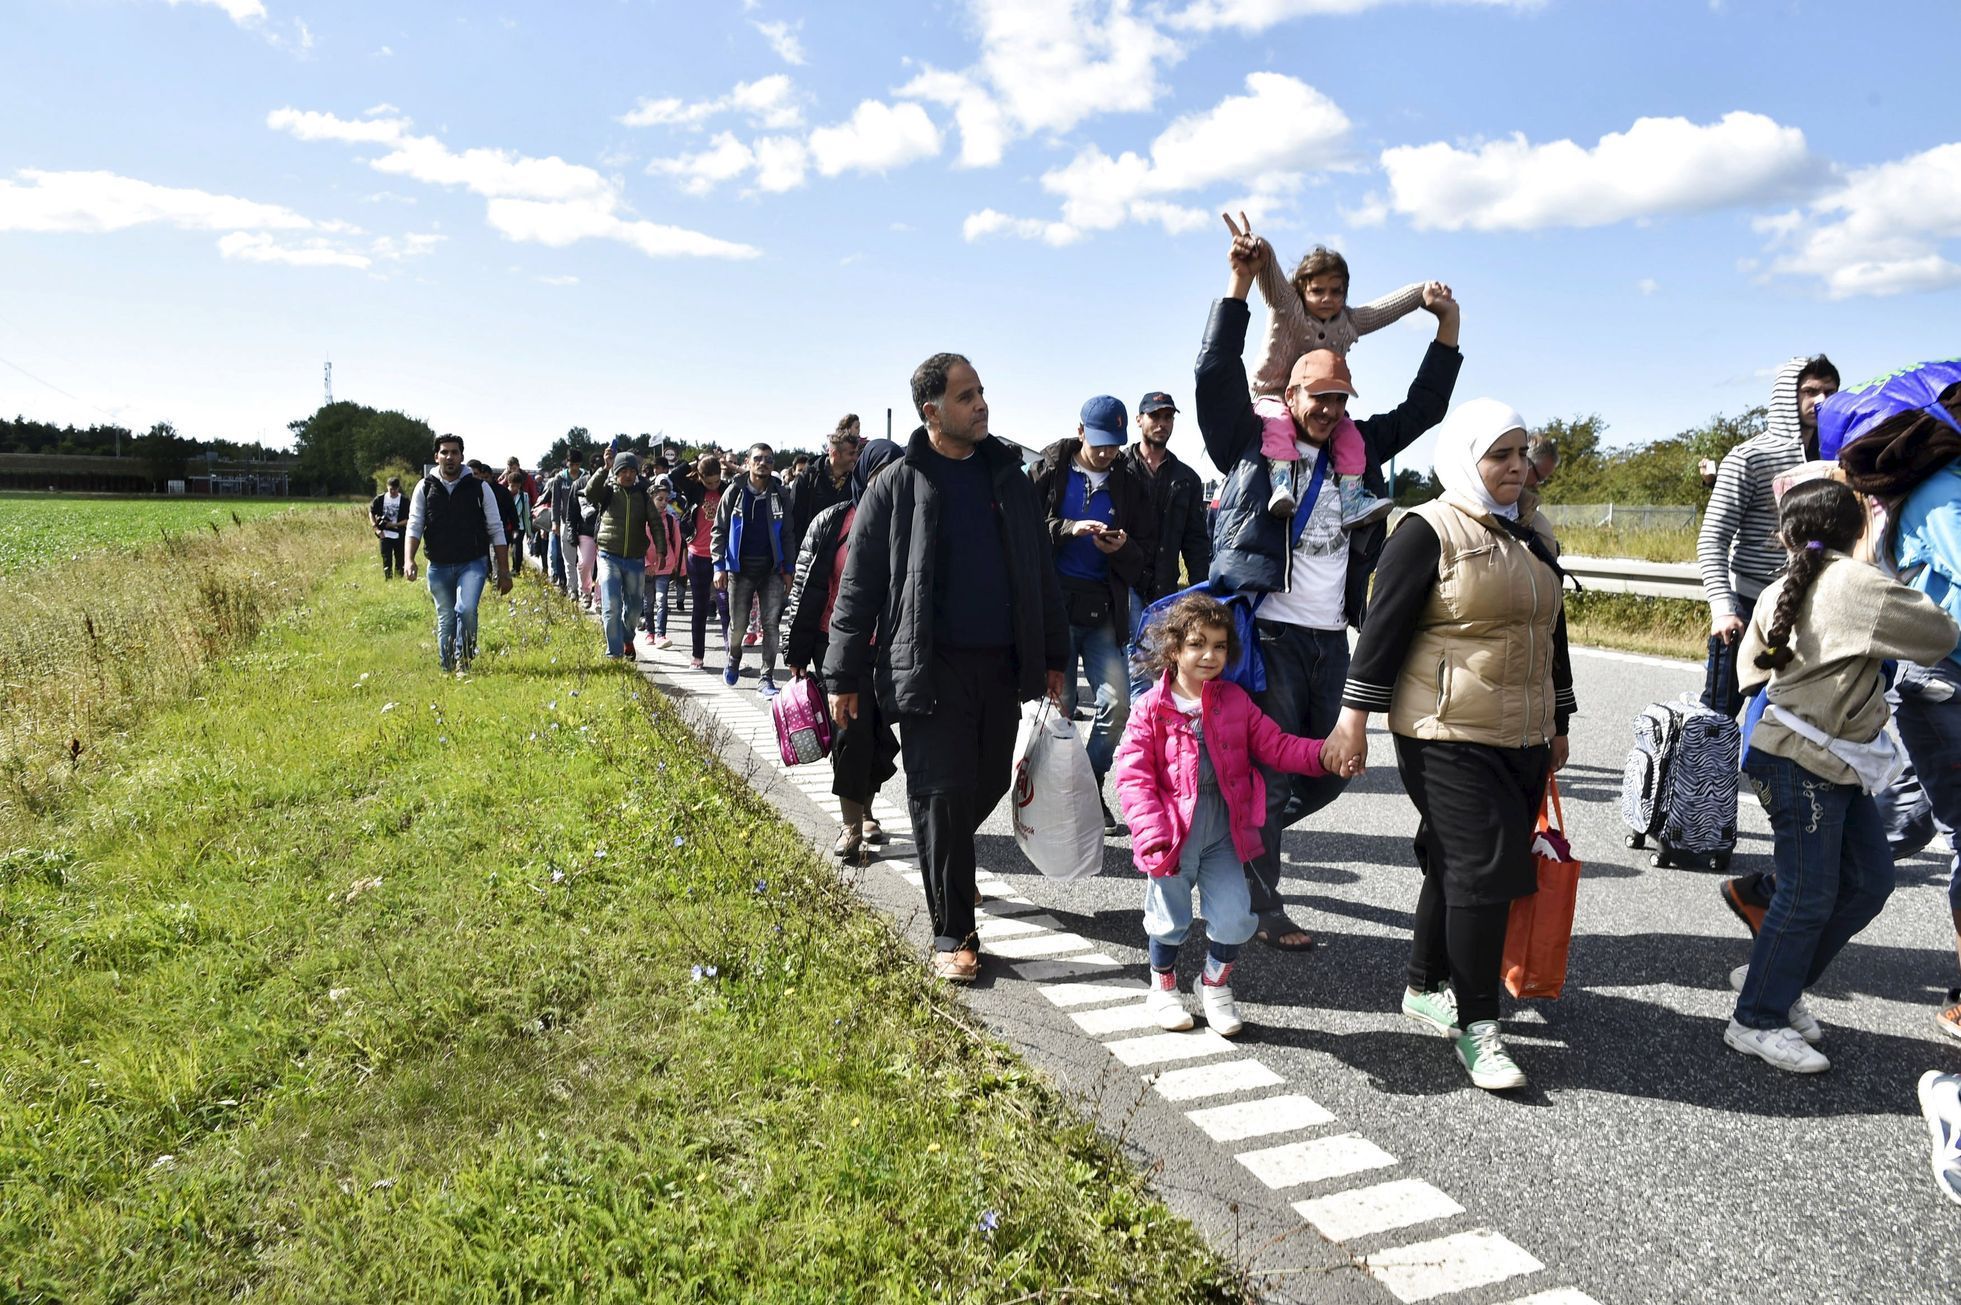 A large group of migrants, mainly from Syria, walk towards the north on a highway in Denmark